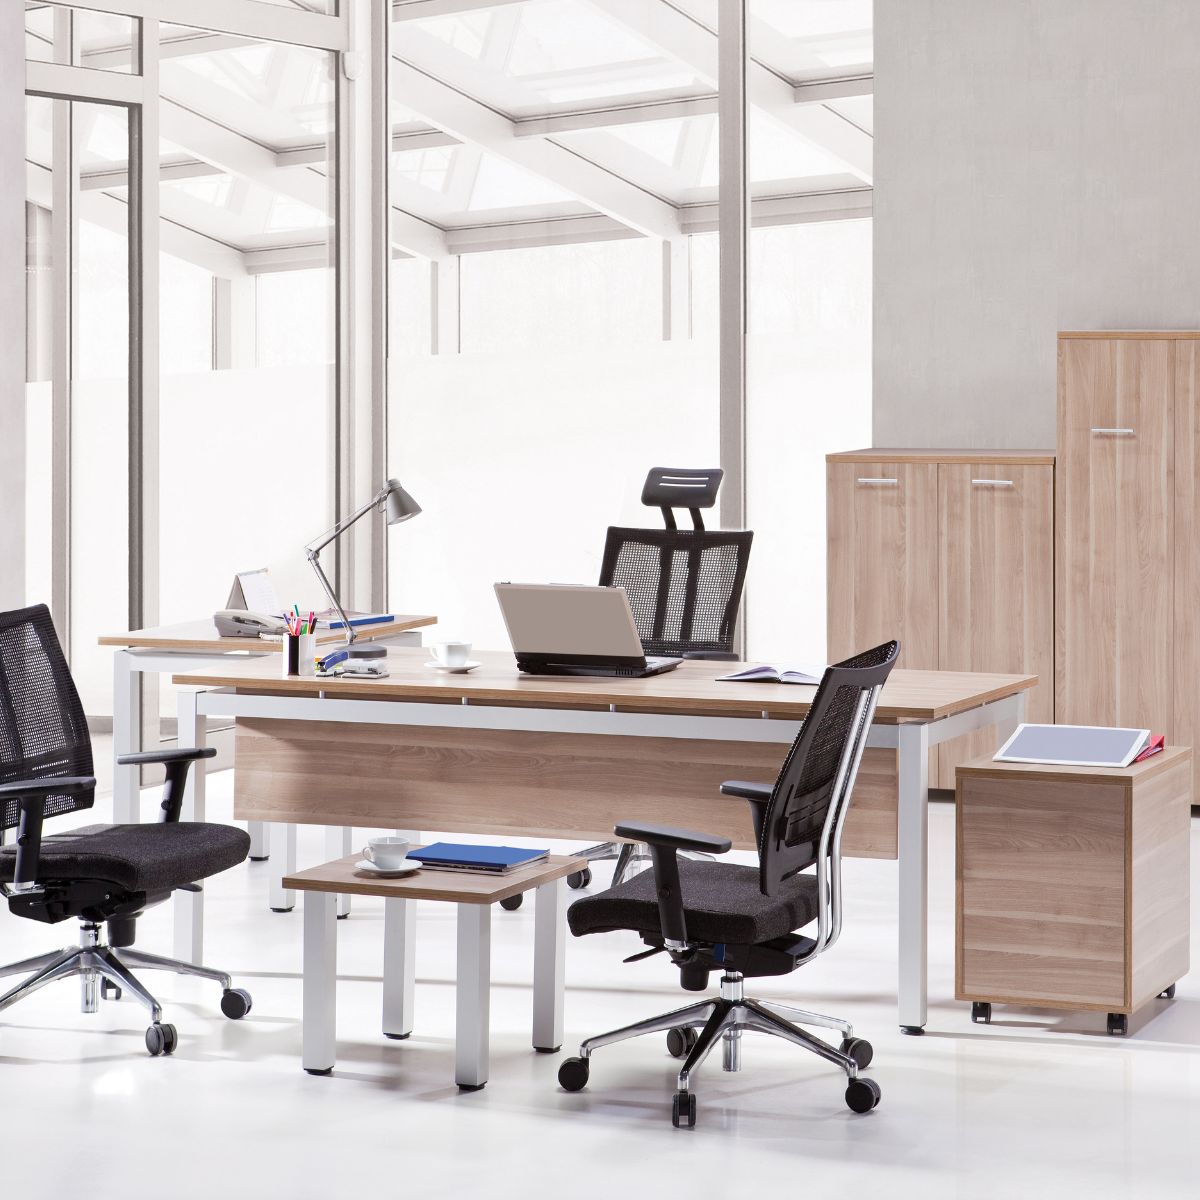 You are currently viewing Ideas for setting up your desk to keep it clean and organized